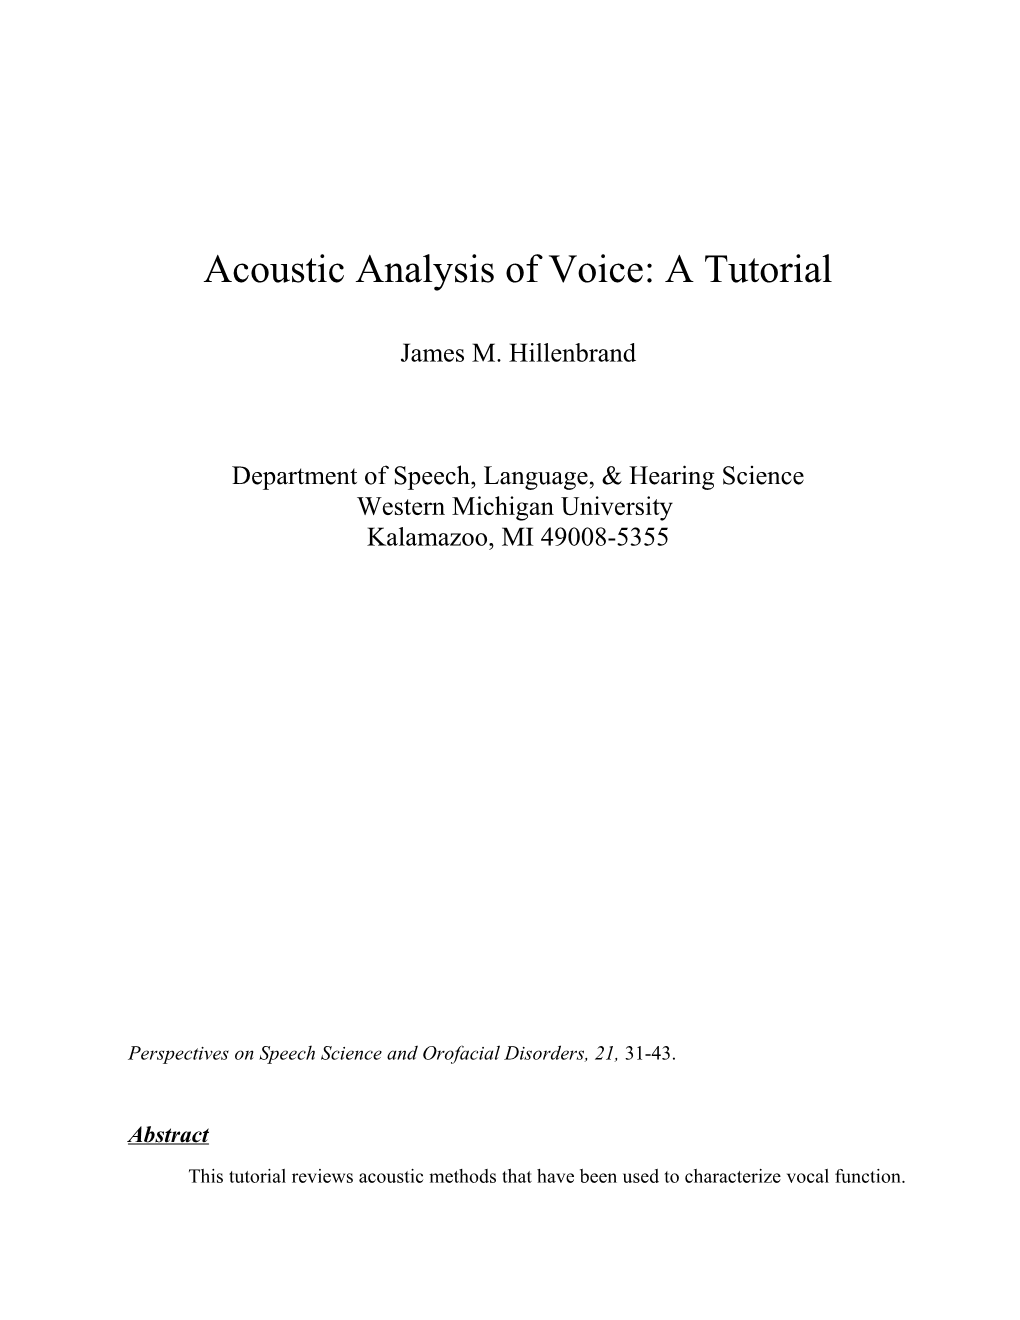 Acoustic Analysis of Voice: a Tutorial